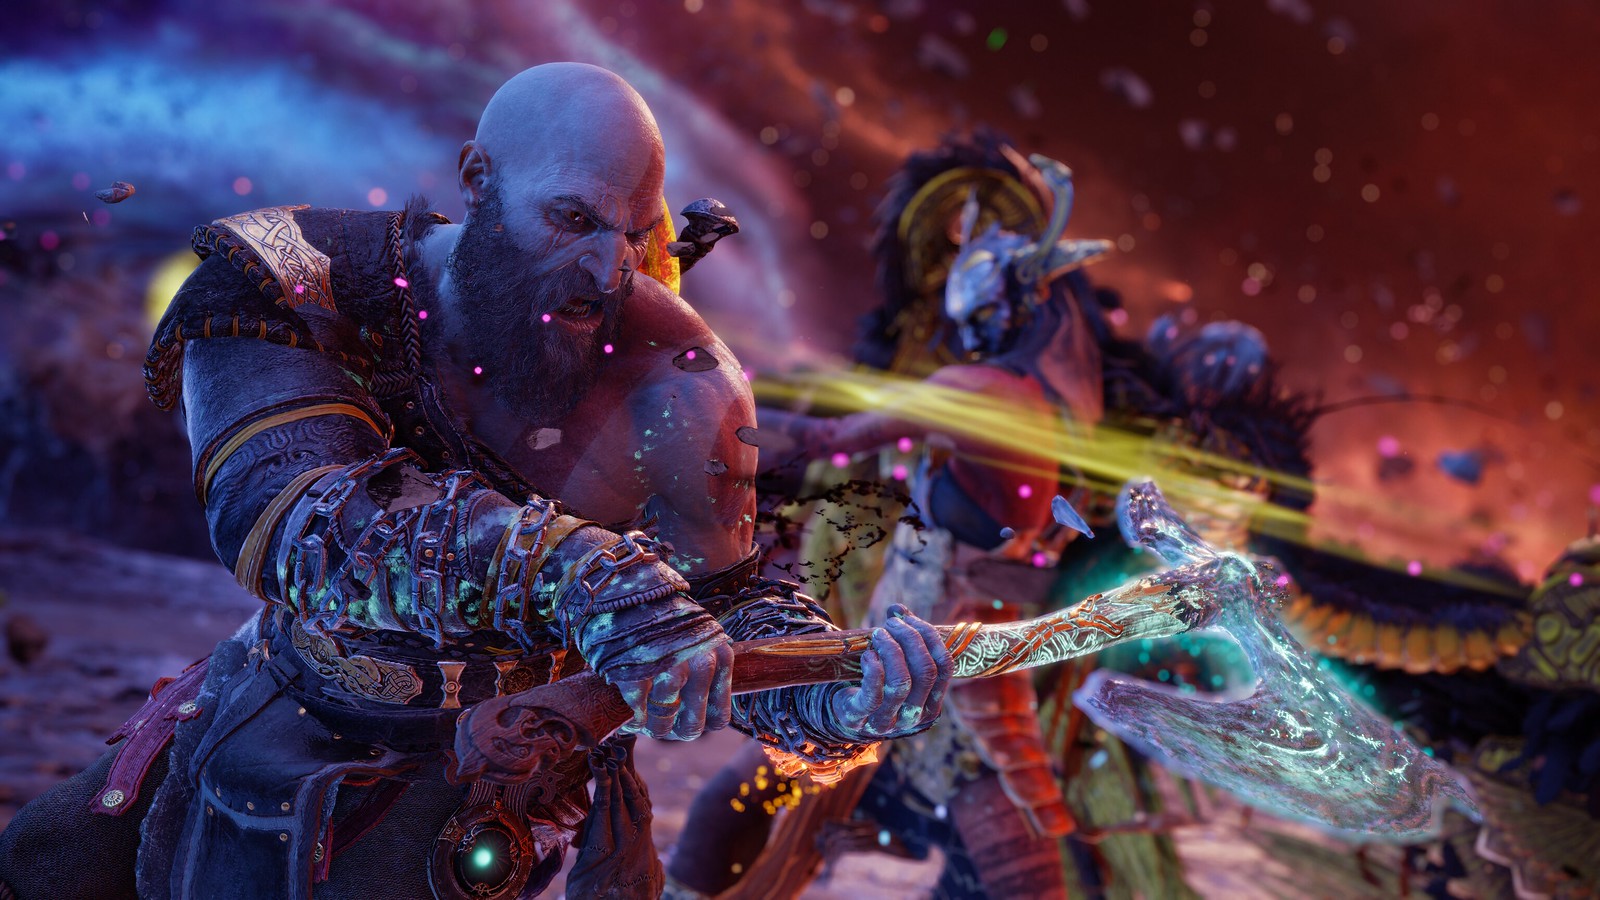 God of War Ragnarok - Does It Have A New Game Plus Mode?